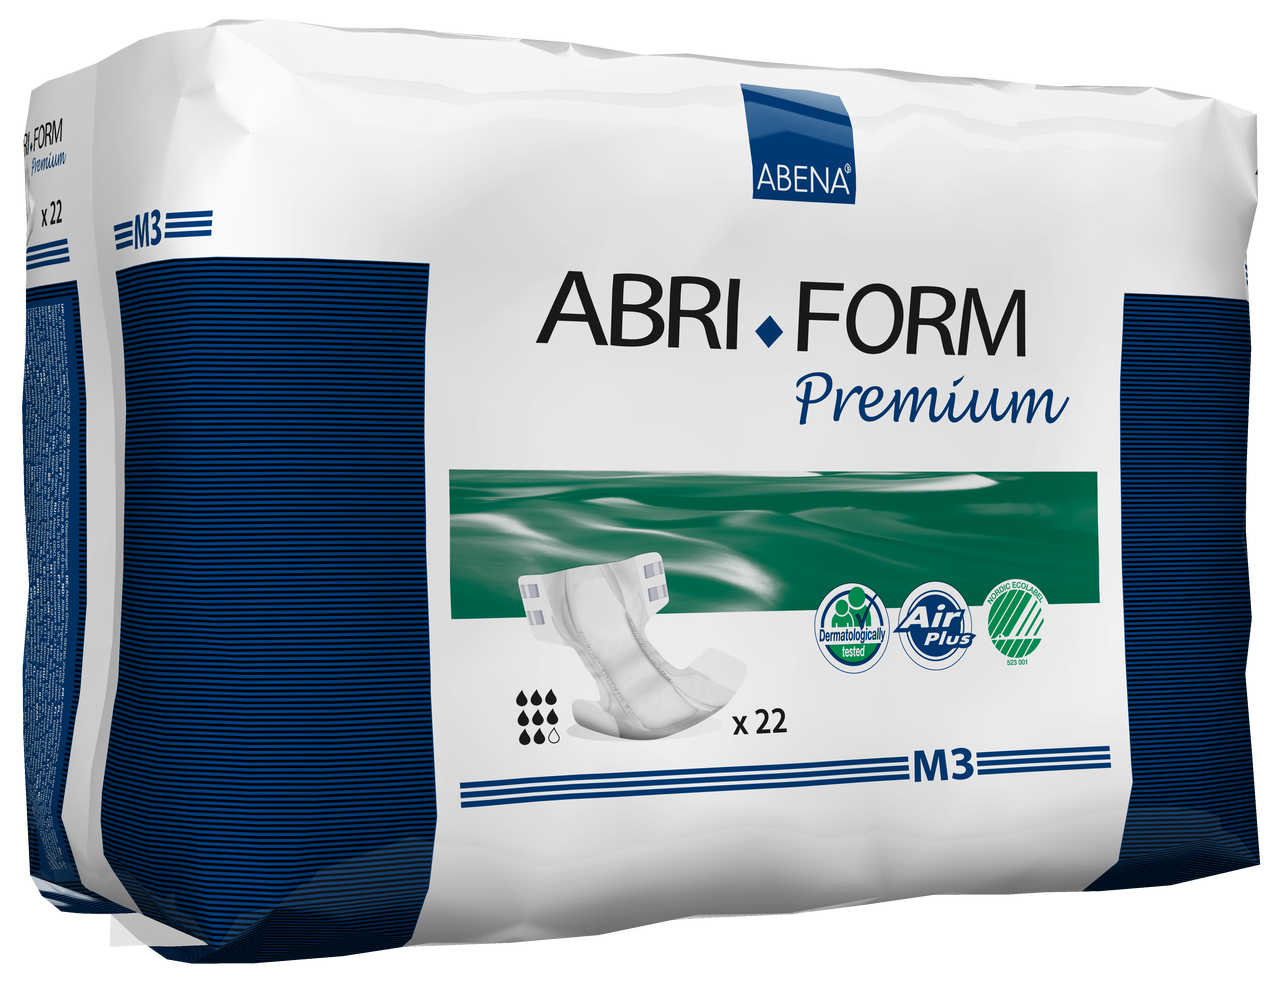 Abena Abri-Form Premium Adult Diapers with Tabs, M3